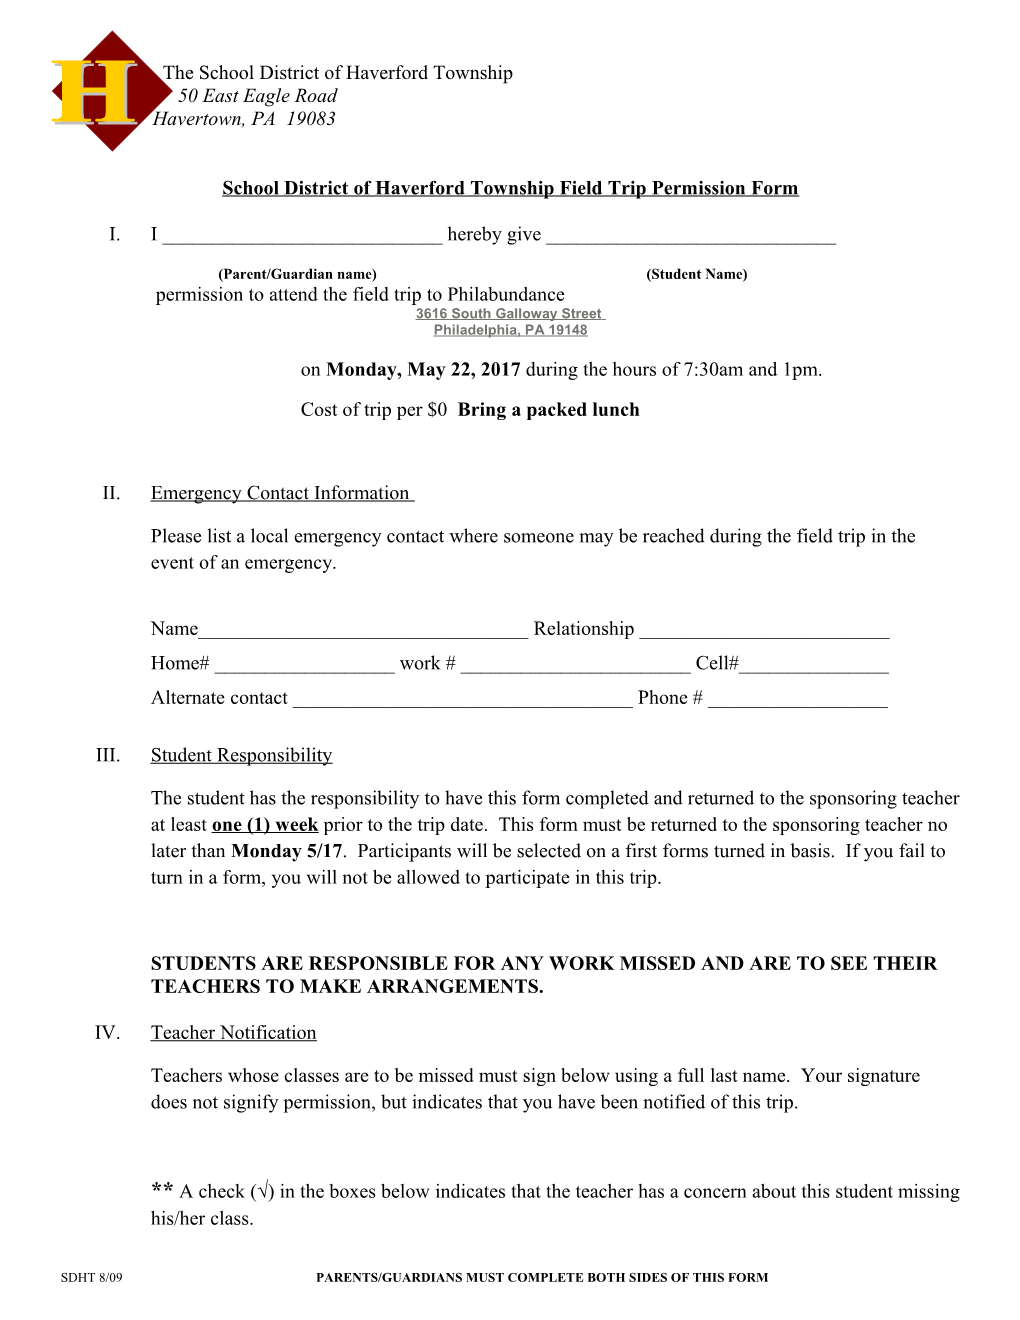 School District of Haverford Township Field Trip Permission Form